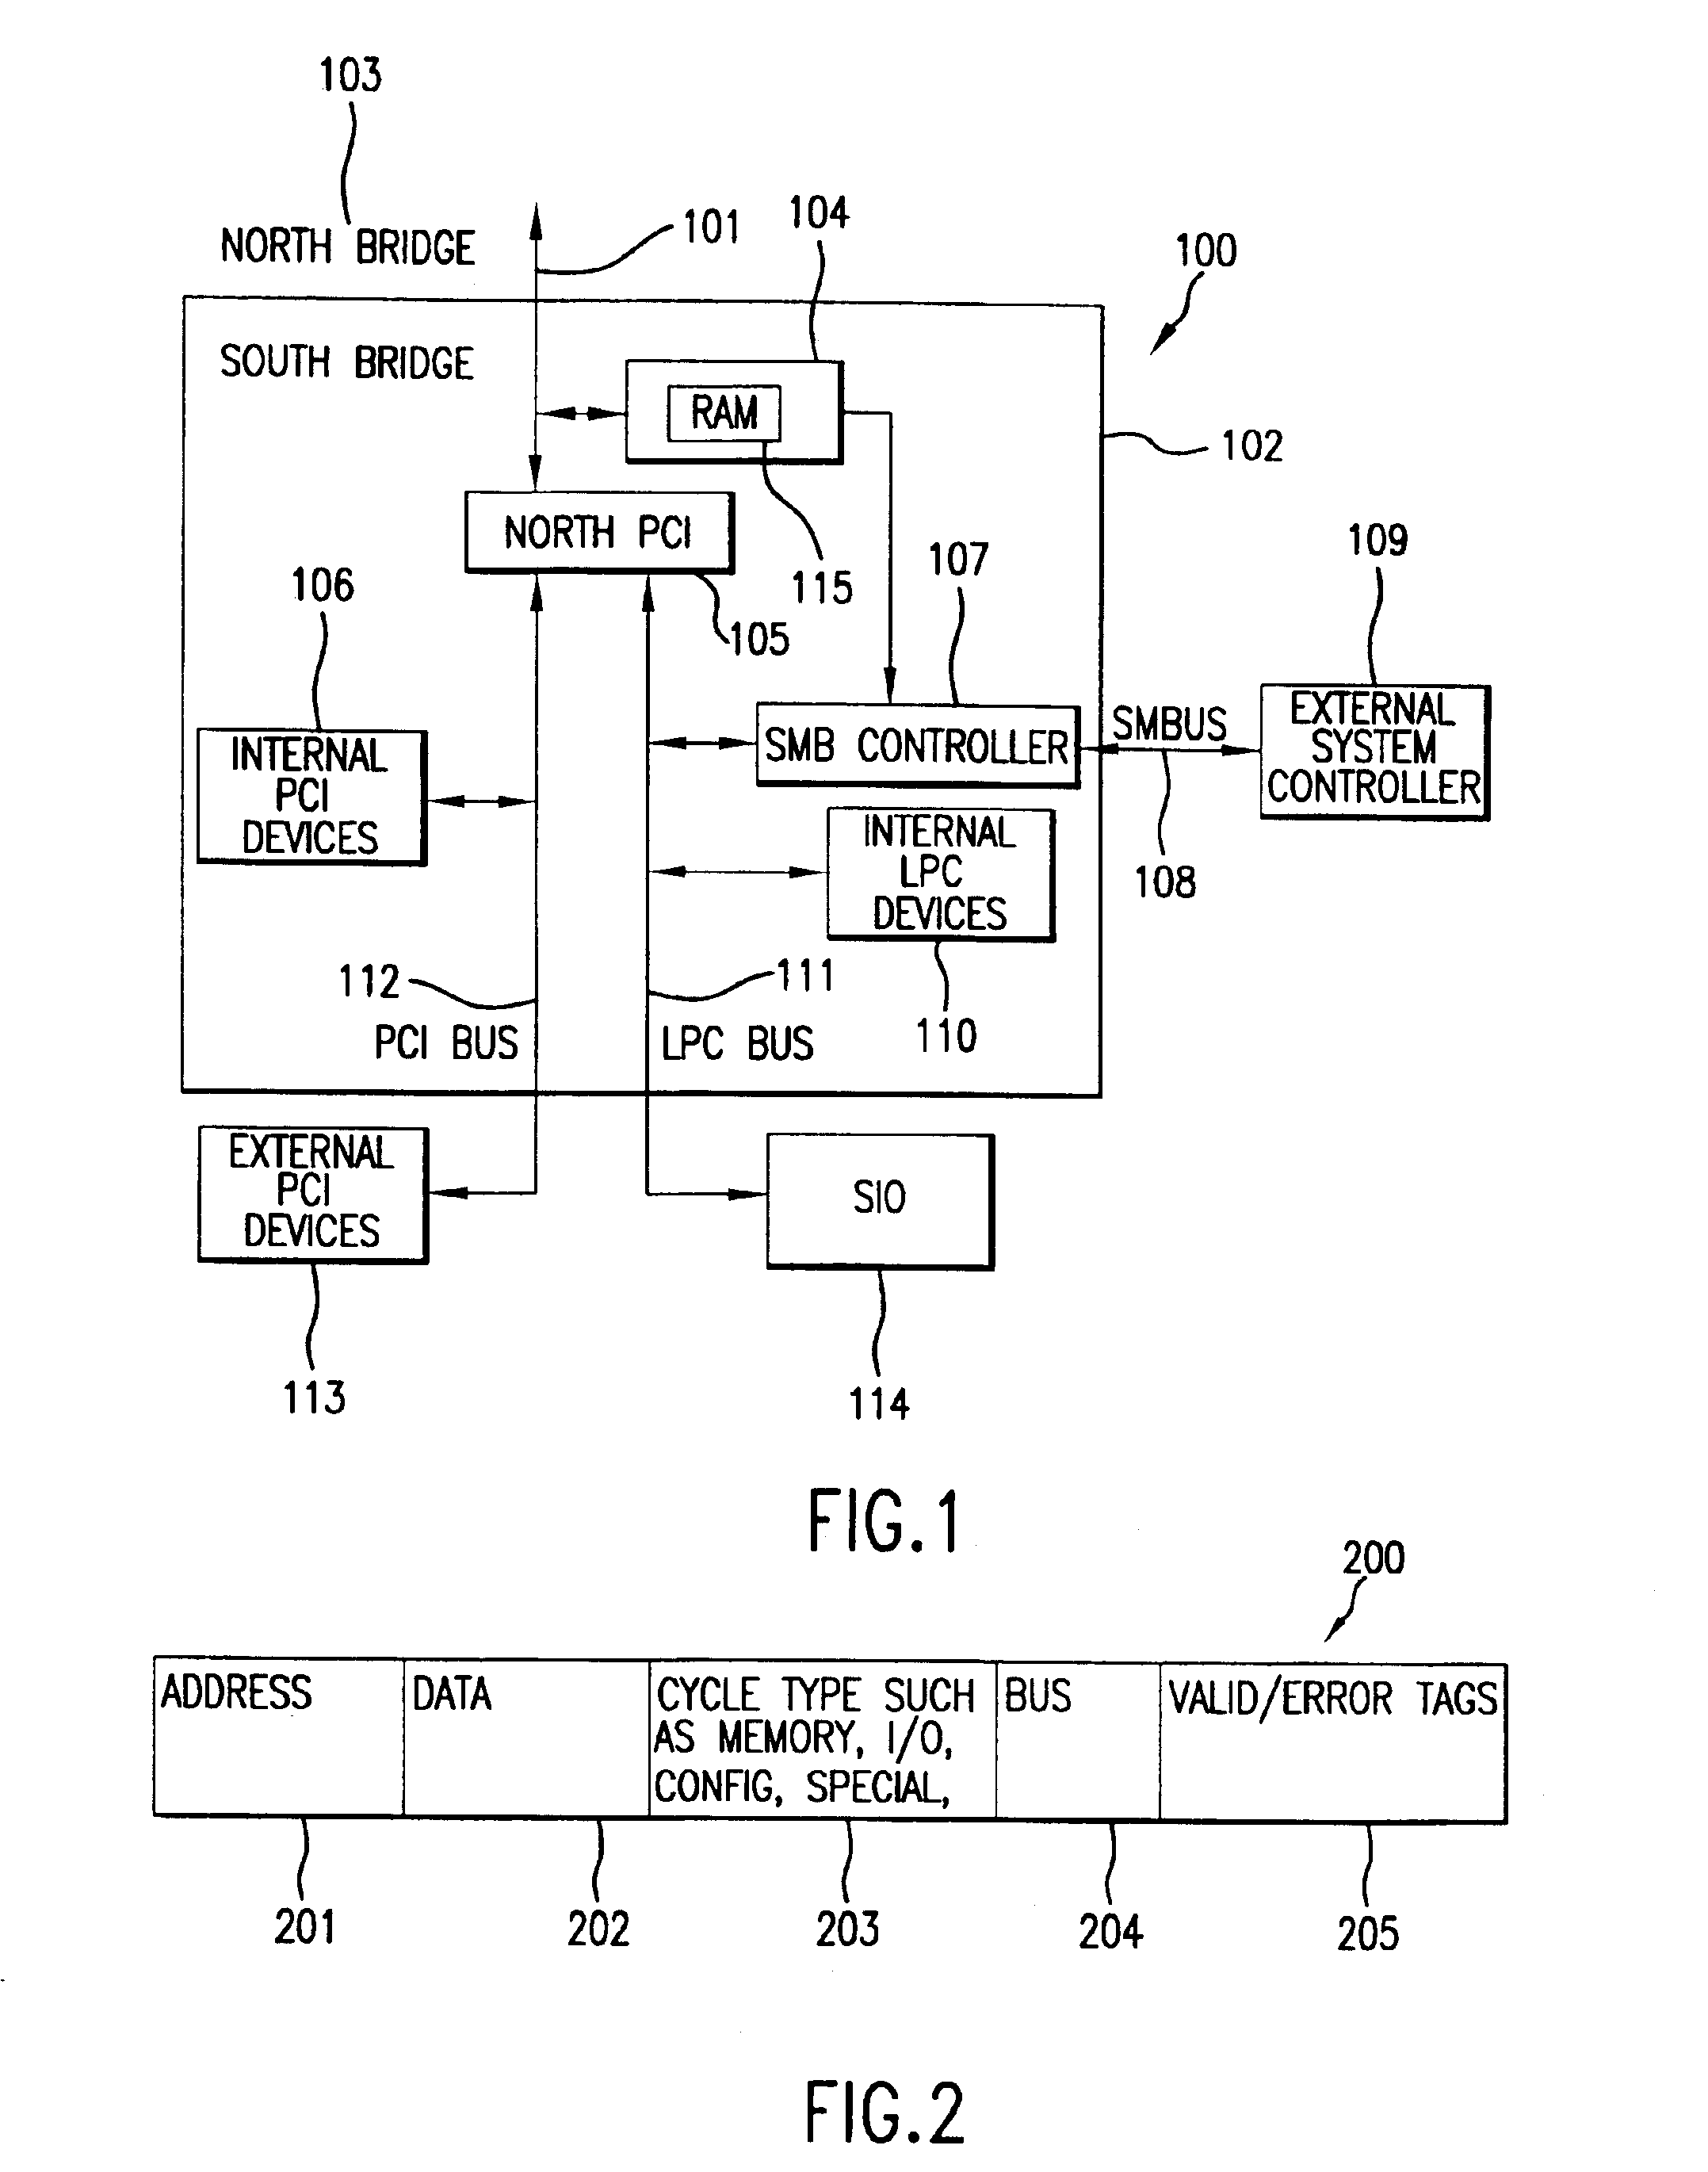 Method and system to implement a system event log for system manageability